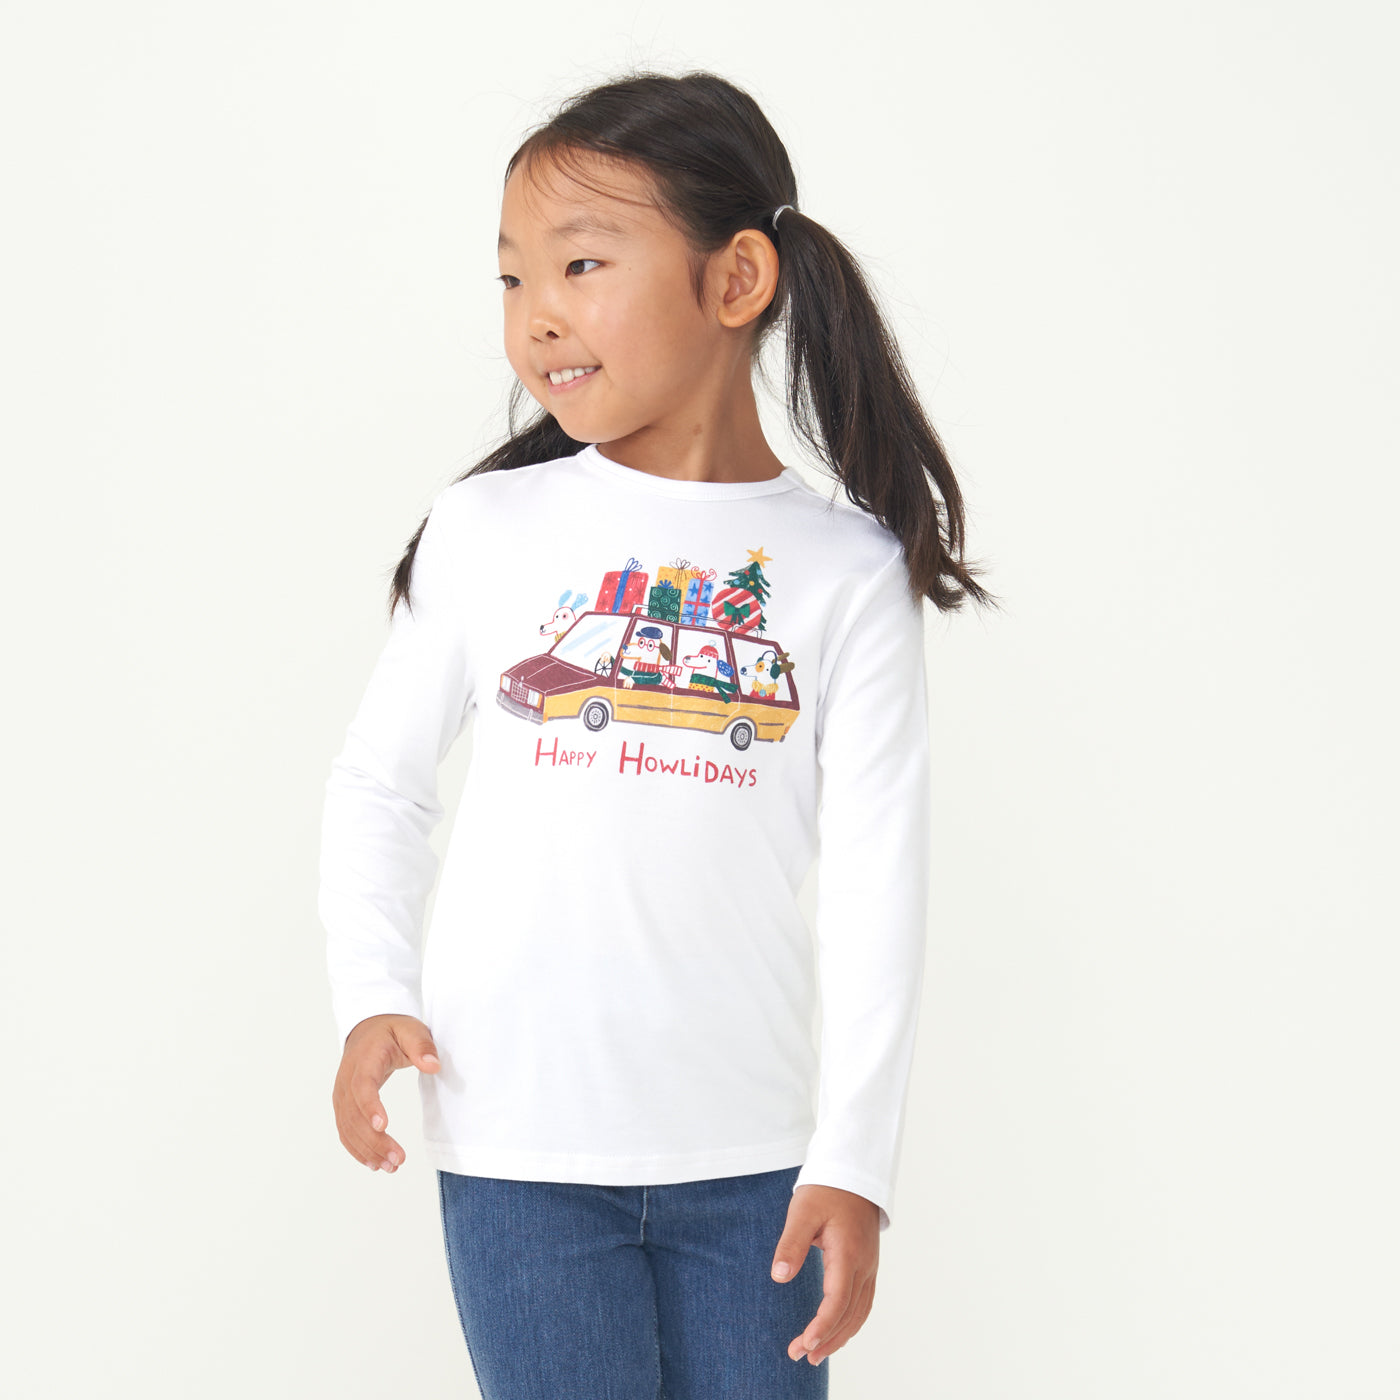 Child looking to the side wearing a Happy Howlidays graphic tee